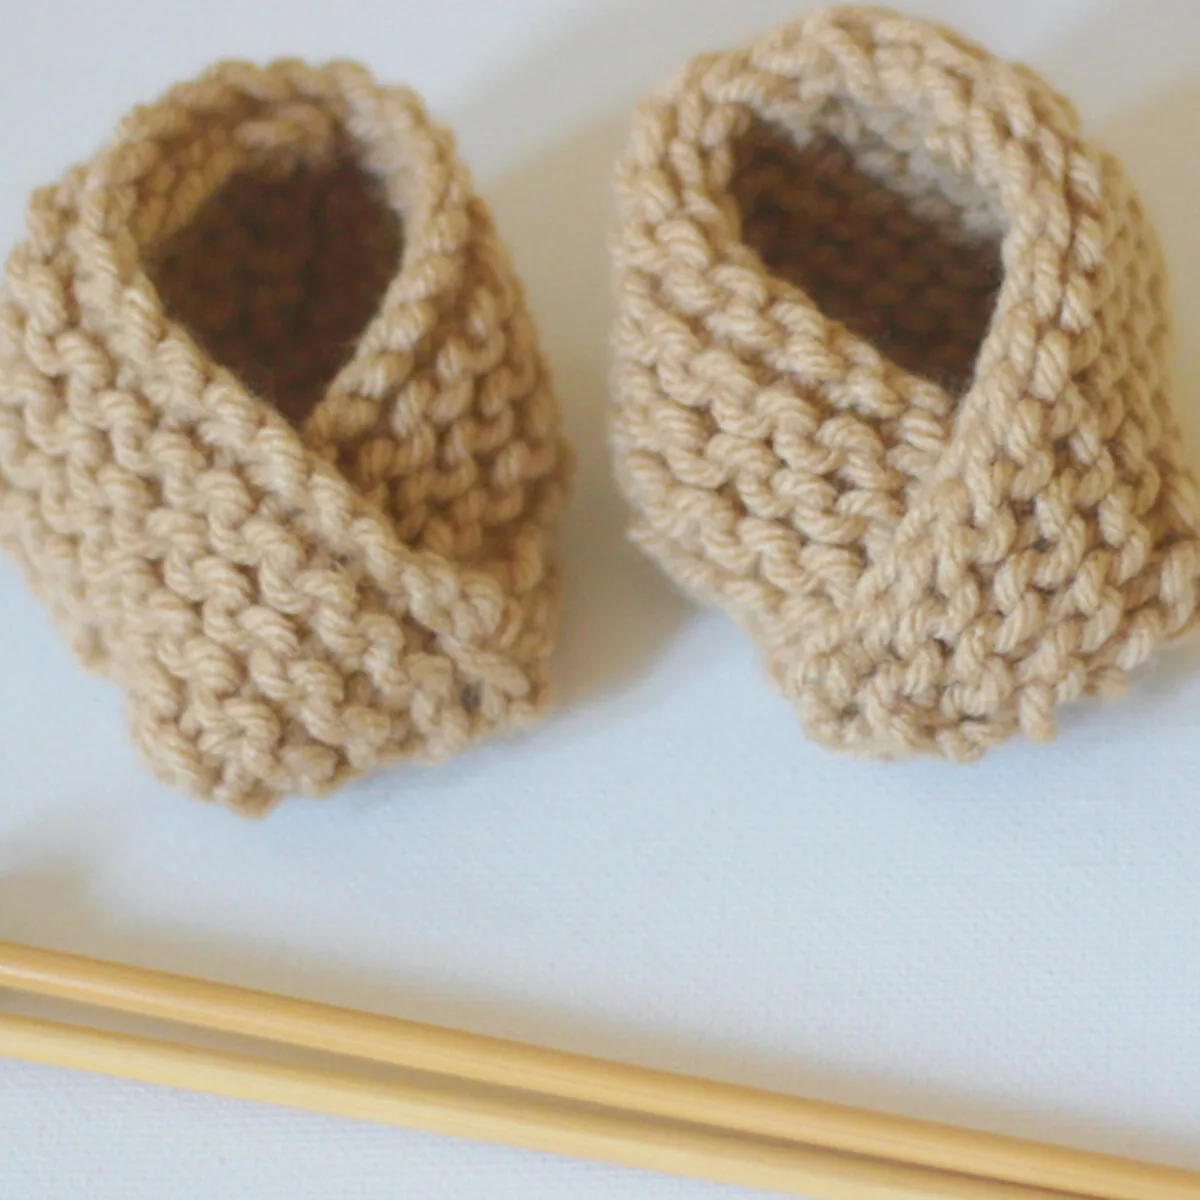 Knitted baby booties in garter stitch with beige yarn color and knitting needles.